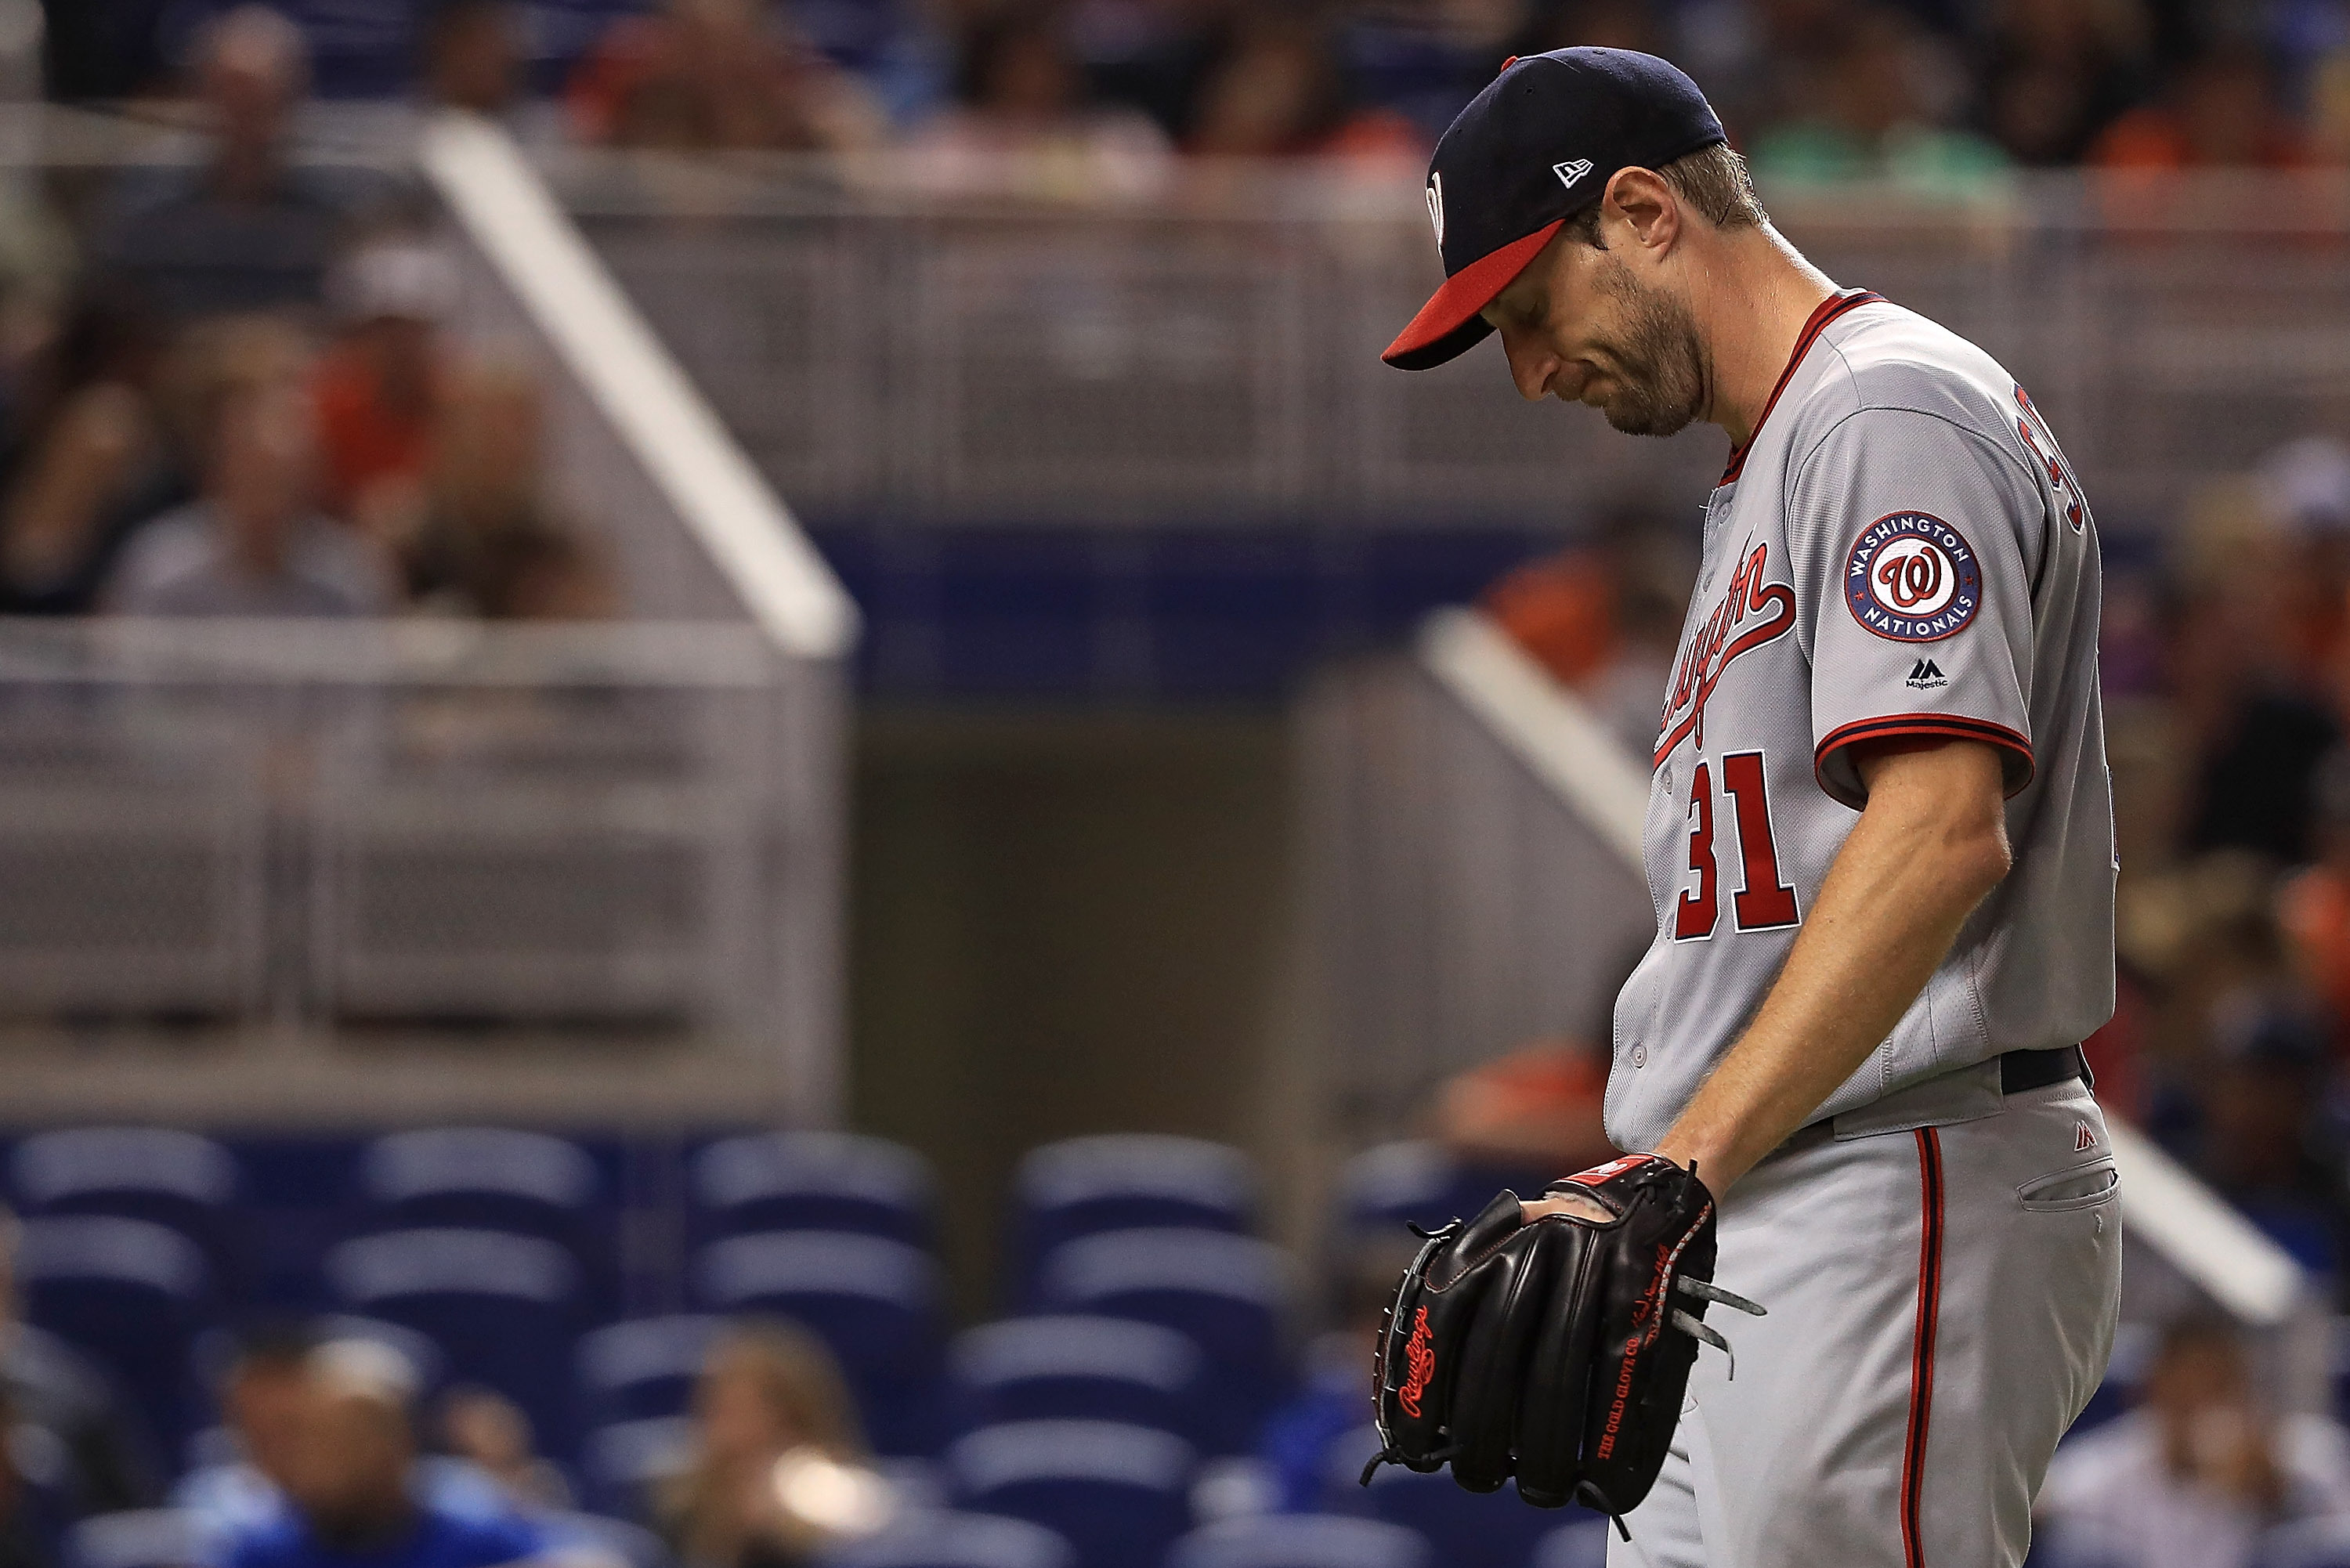 Nationals place ace Max Scherzer on the 10-day injured list